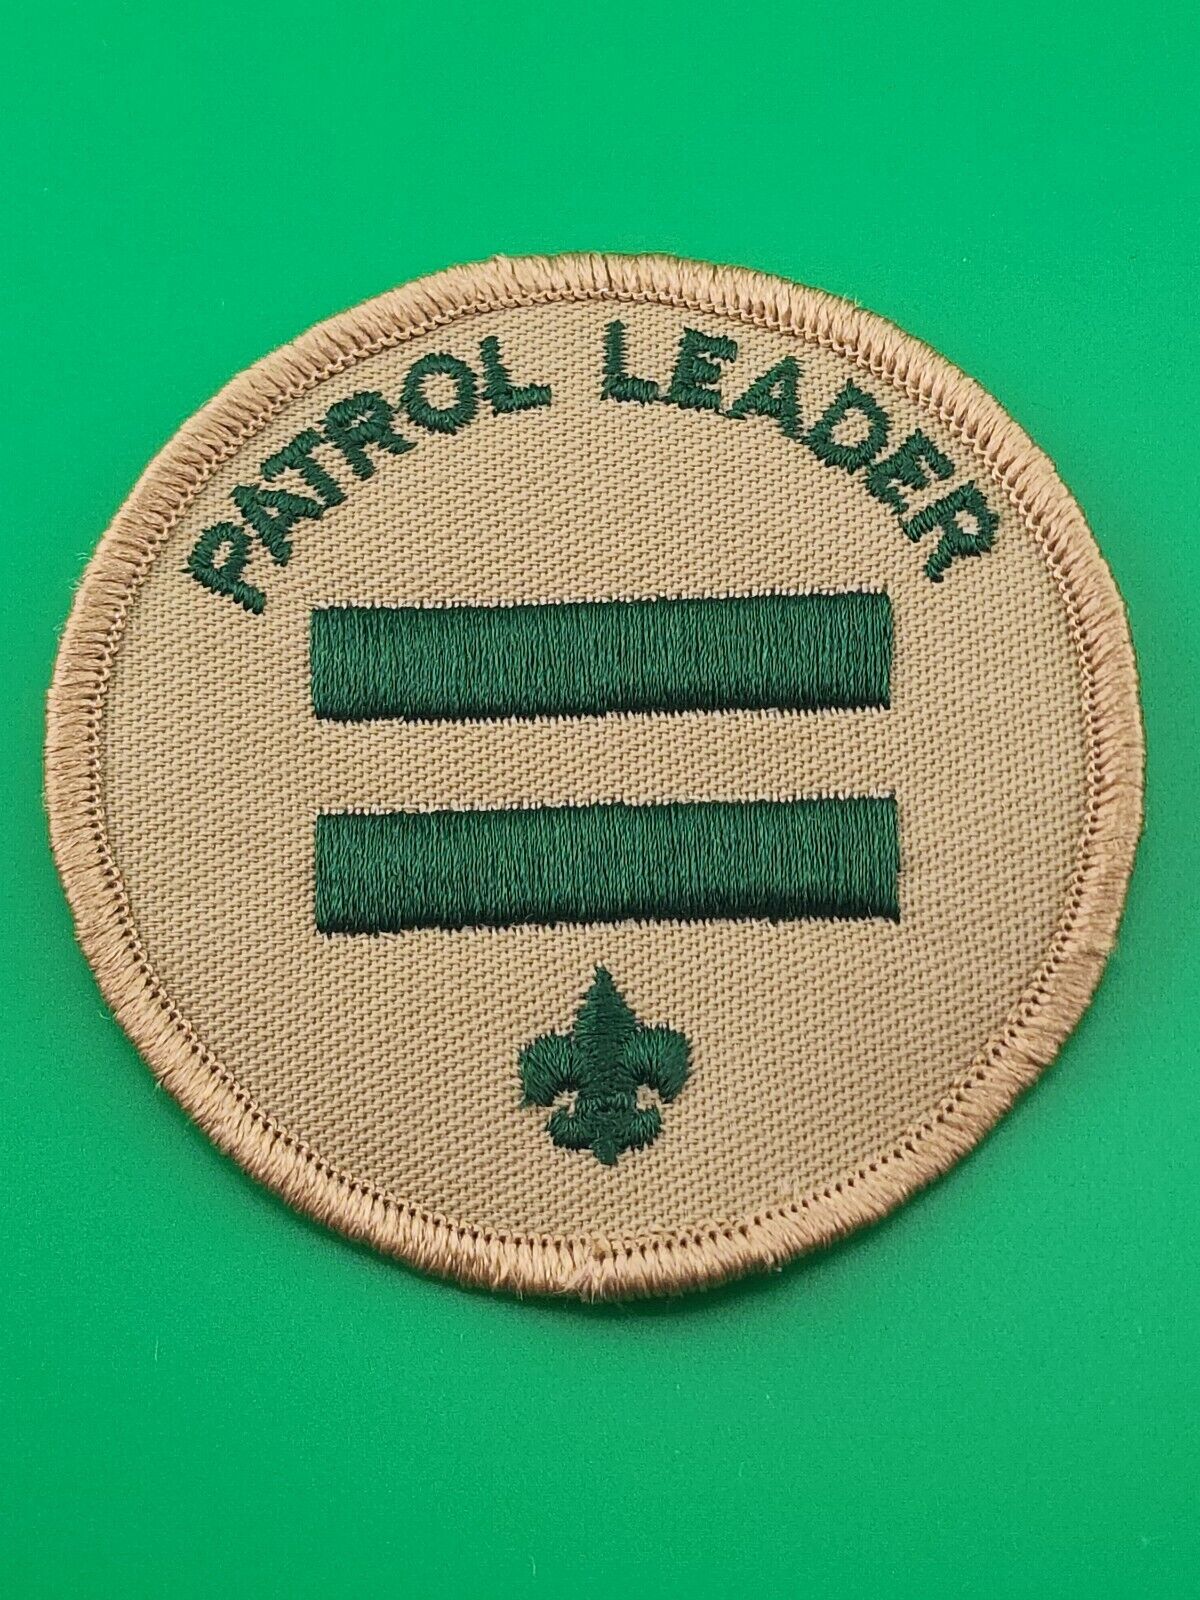 Patrol Leader Tan Patch BSA Boy Scouts Of America NEW